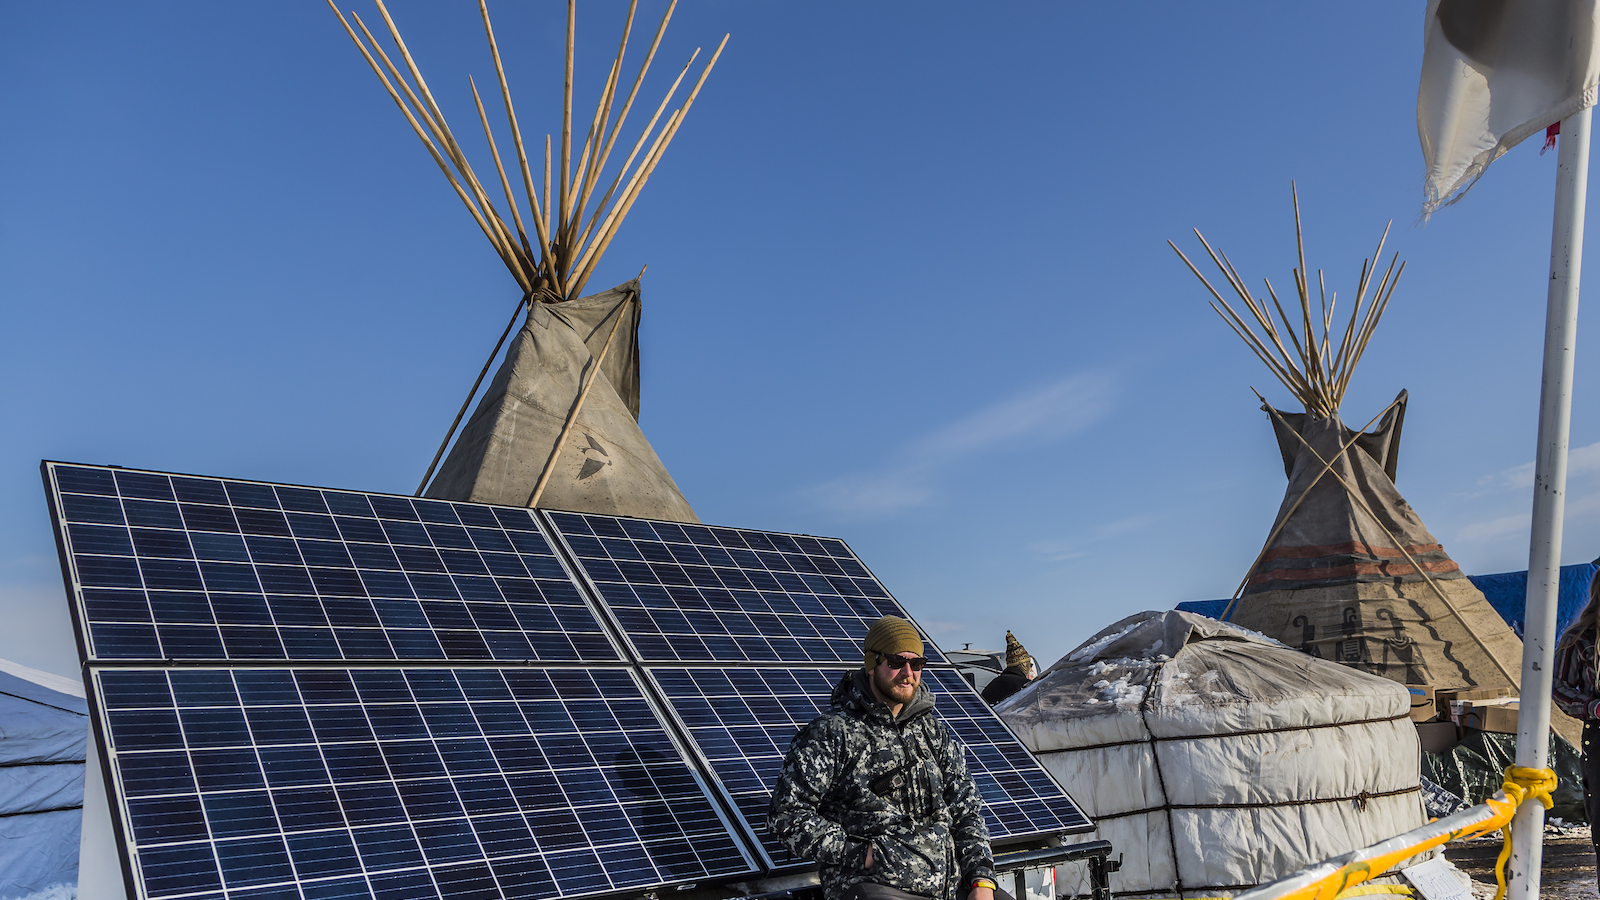 A man sits on a solar panel next to Indigenous teepees.